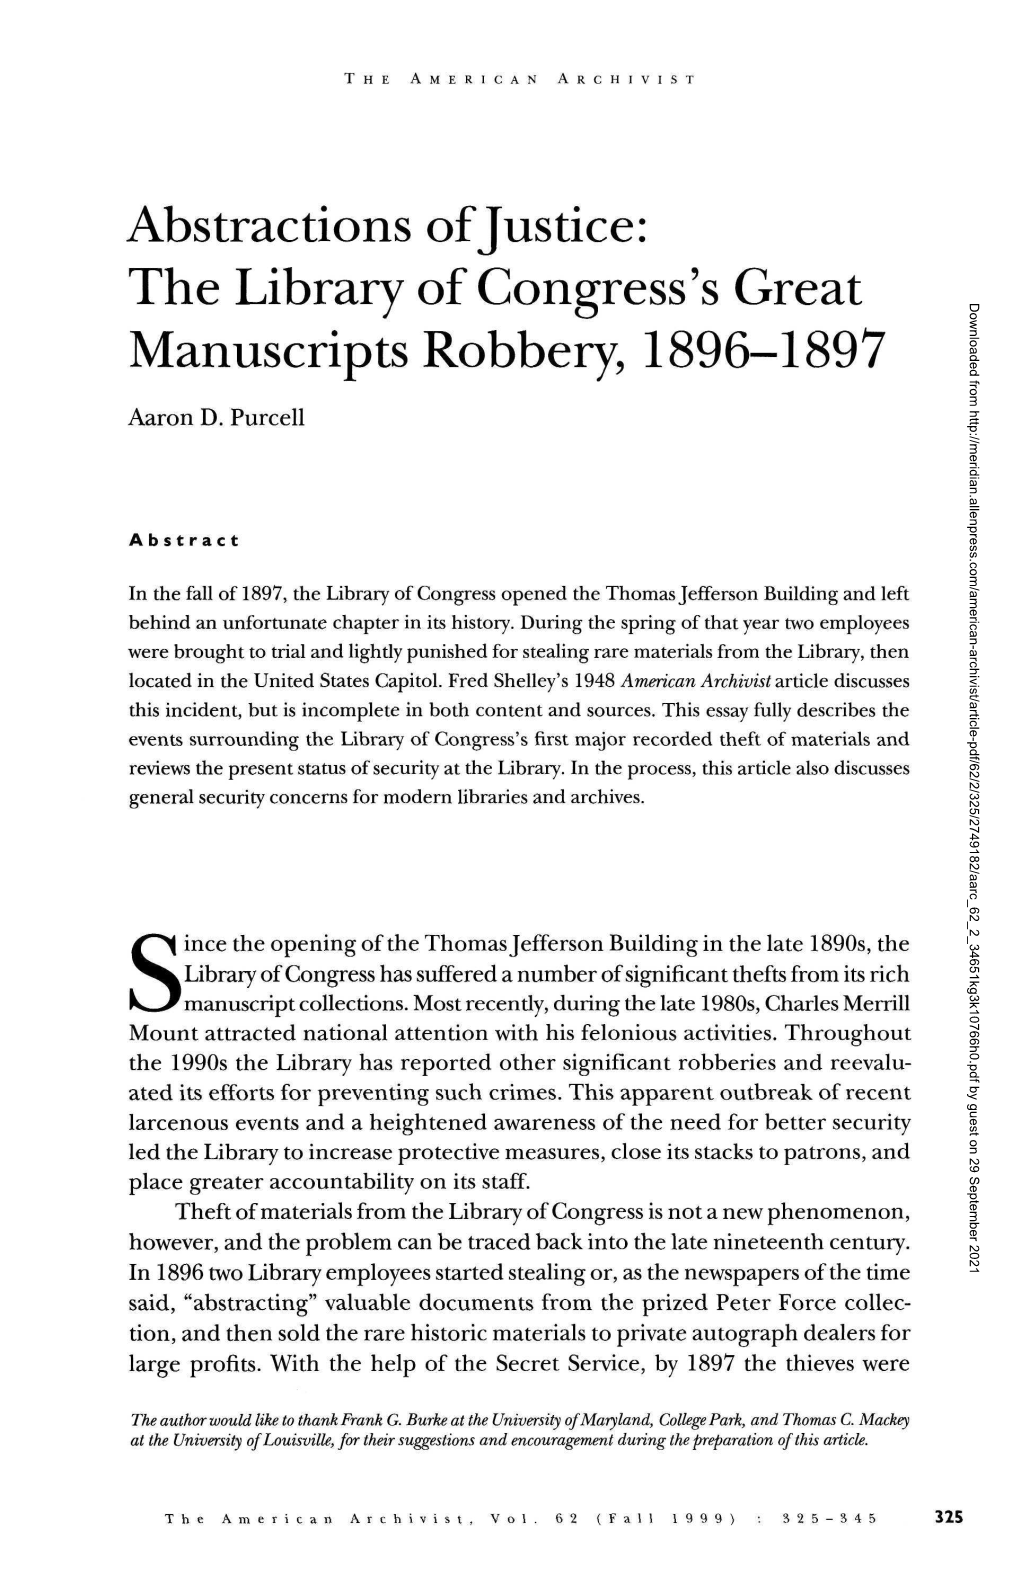 THE LIBRARY of CONGRESS's GREAT MANUSCRIPTS ROBBERY, 1896-1897 Nearly Three Million Volumes